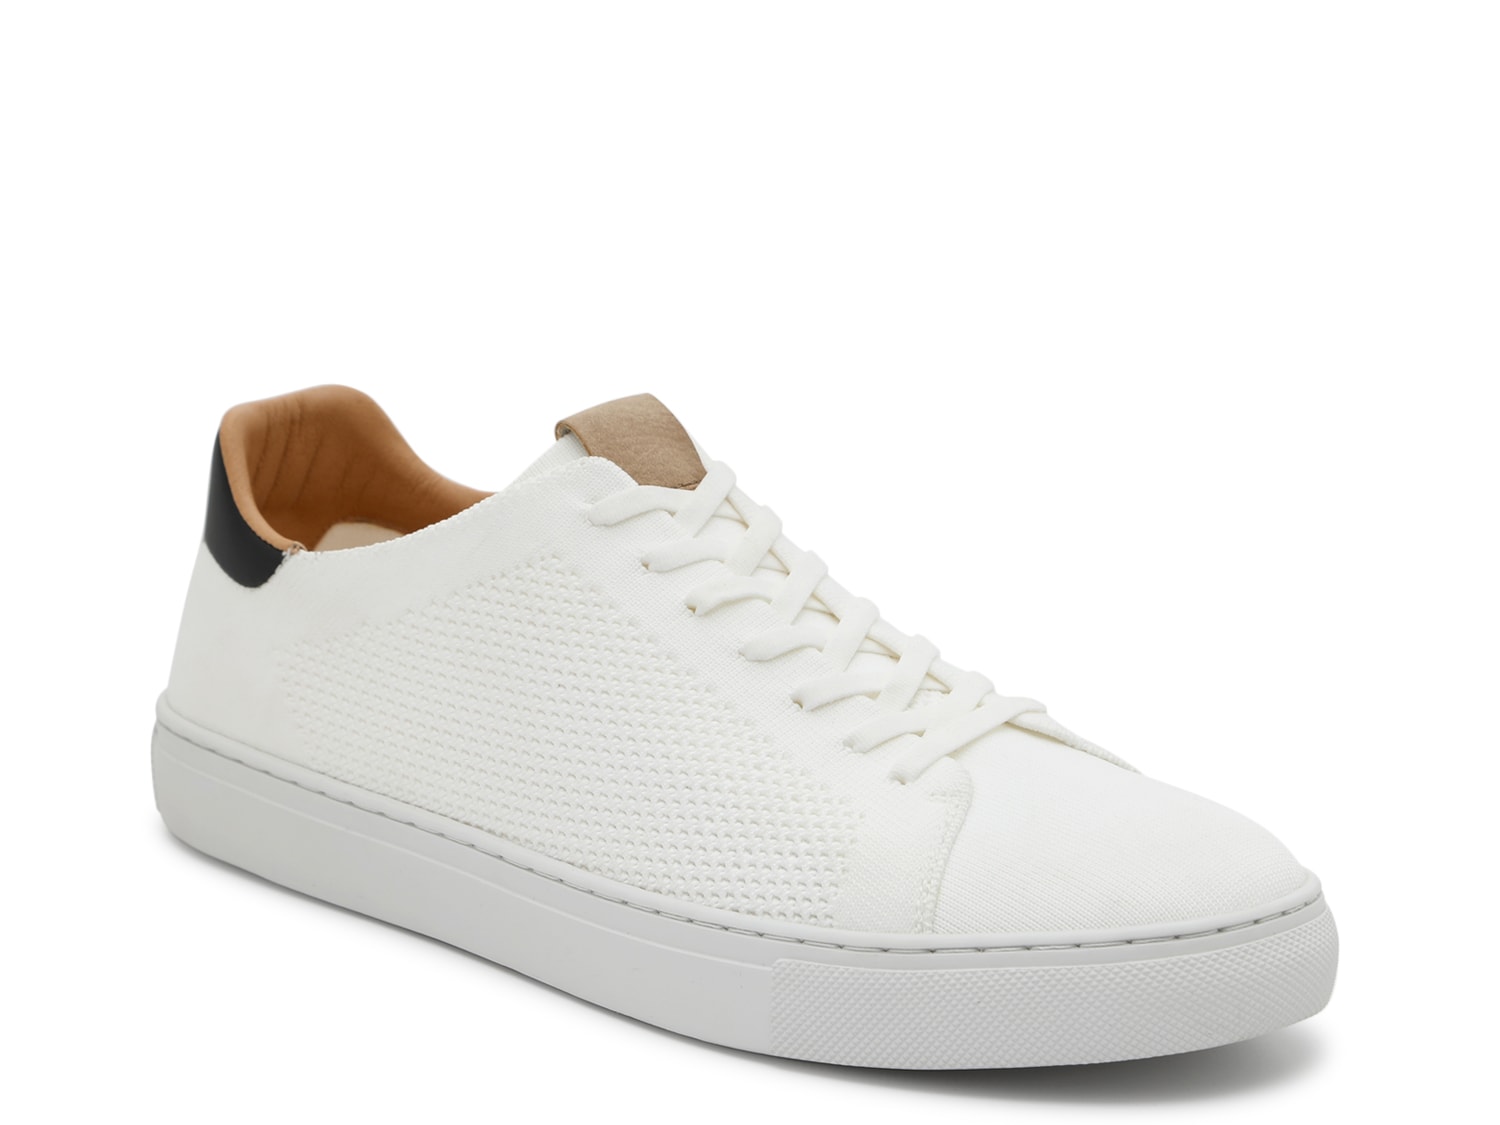 Mix No. 6 Mikell Slip-On Sneaker - Men's - Free Shipping | DSW